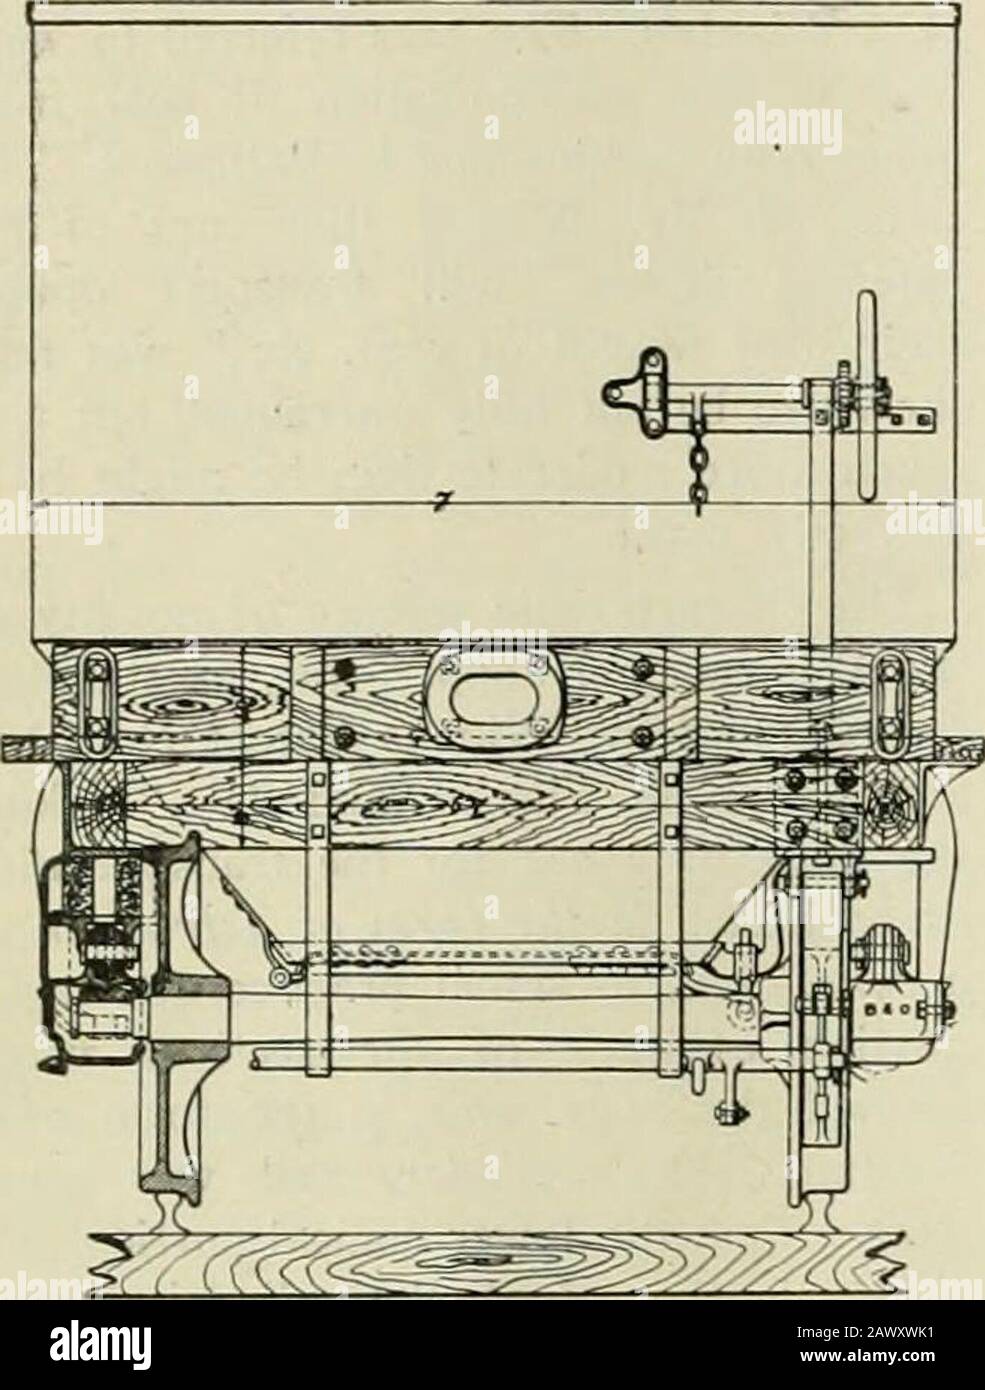 Railway and Locomotive Engineering . this patent, it appeared from the testi- = 1 ft., June, 1879, and the special fea- mony, that cars constructed by Mr. tures of the car, while not fully shown inans, in accordance with the patent in the drawing, will be sufficiently clear specification, while weighing only 5,700 from a brief description. 104 RAILWAY AND LOCOMOTIVE ENGINEERING April, 1921 The underframe was composed of longi-tudinal and end wooden sills, and the coni-cal hopper bottoms of the three sheet ironsections of the body, projected down-wardly between the side sills, and werefurnish Stock Photo